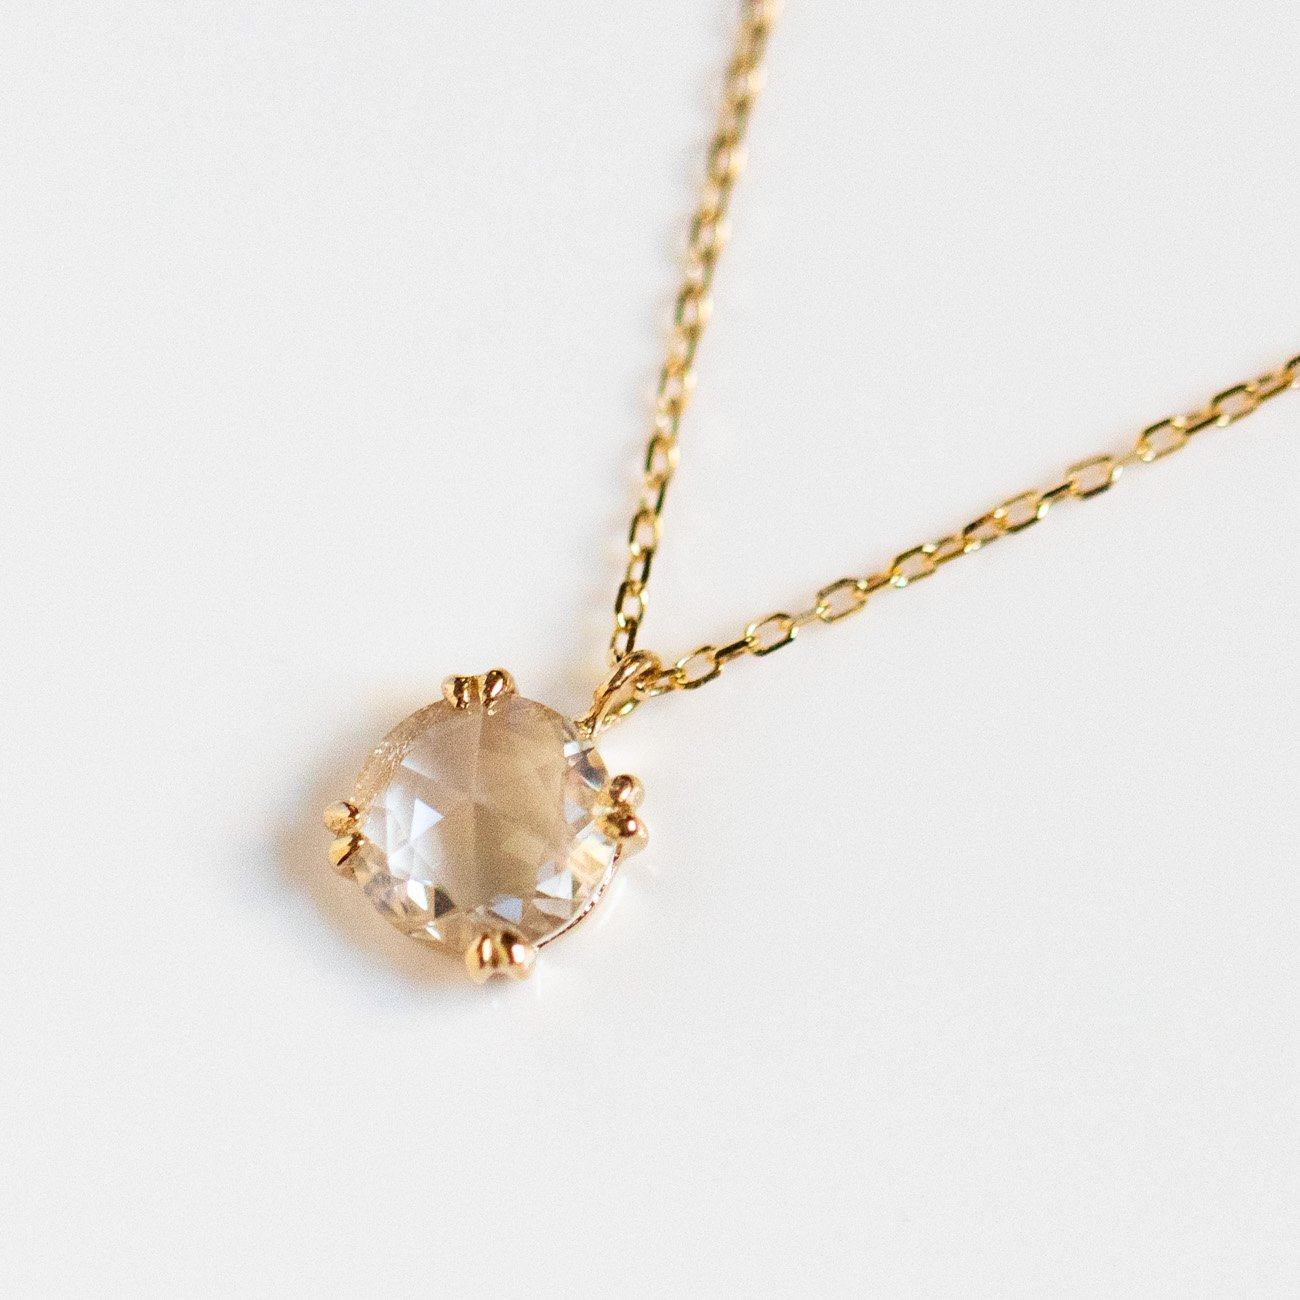  Local Eclectic Solid Gold White Sapphire Pendant Necklace